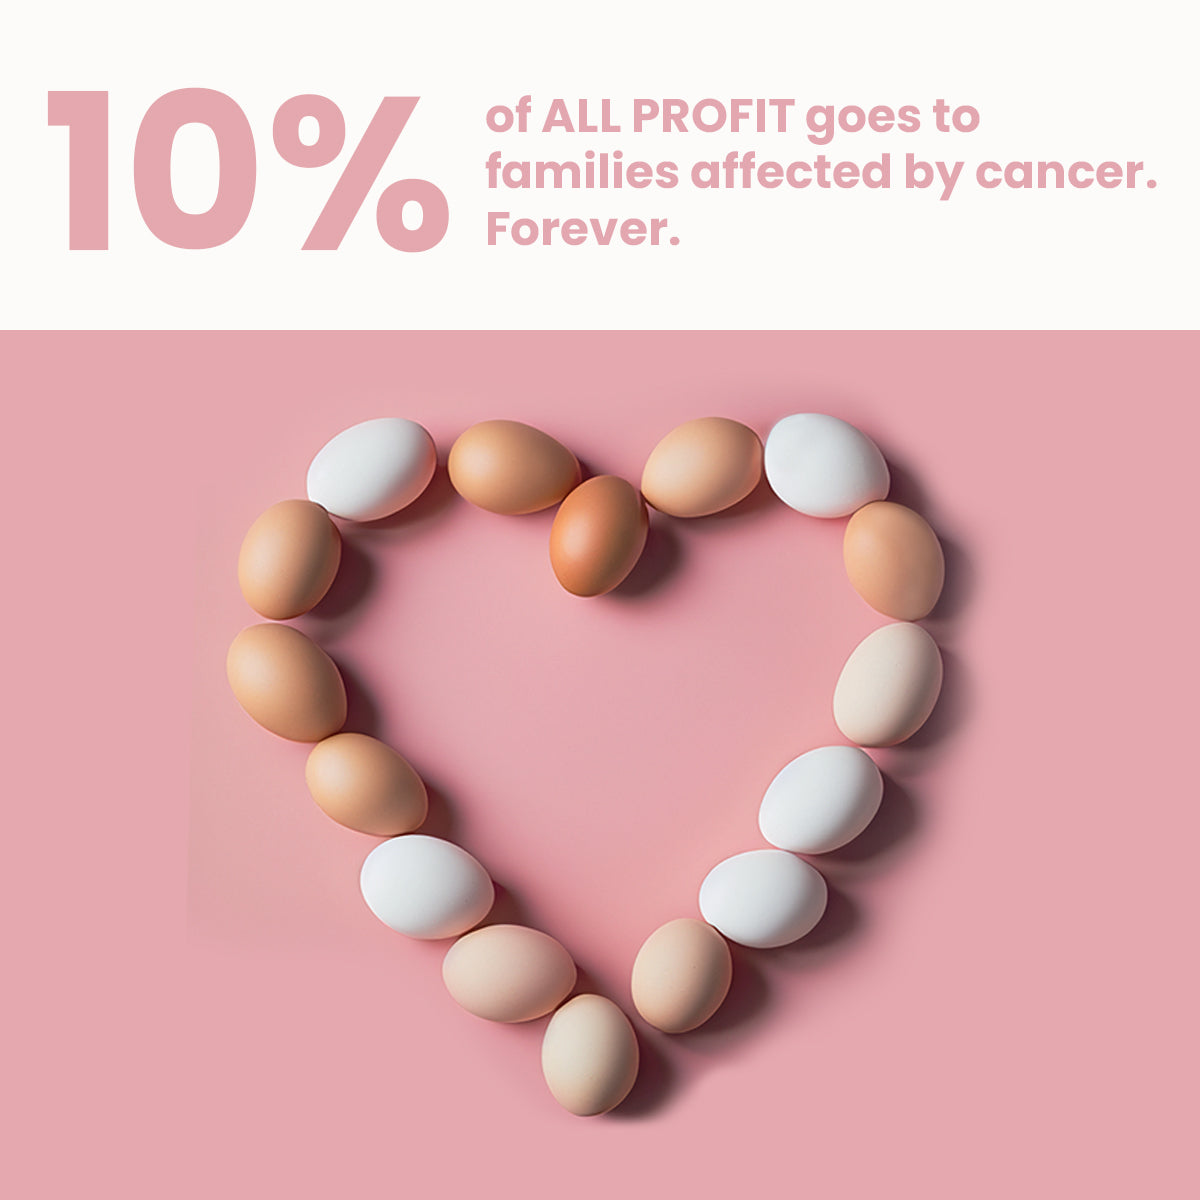 10% of all profit goes to families affected by cancer. forever.